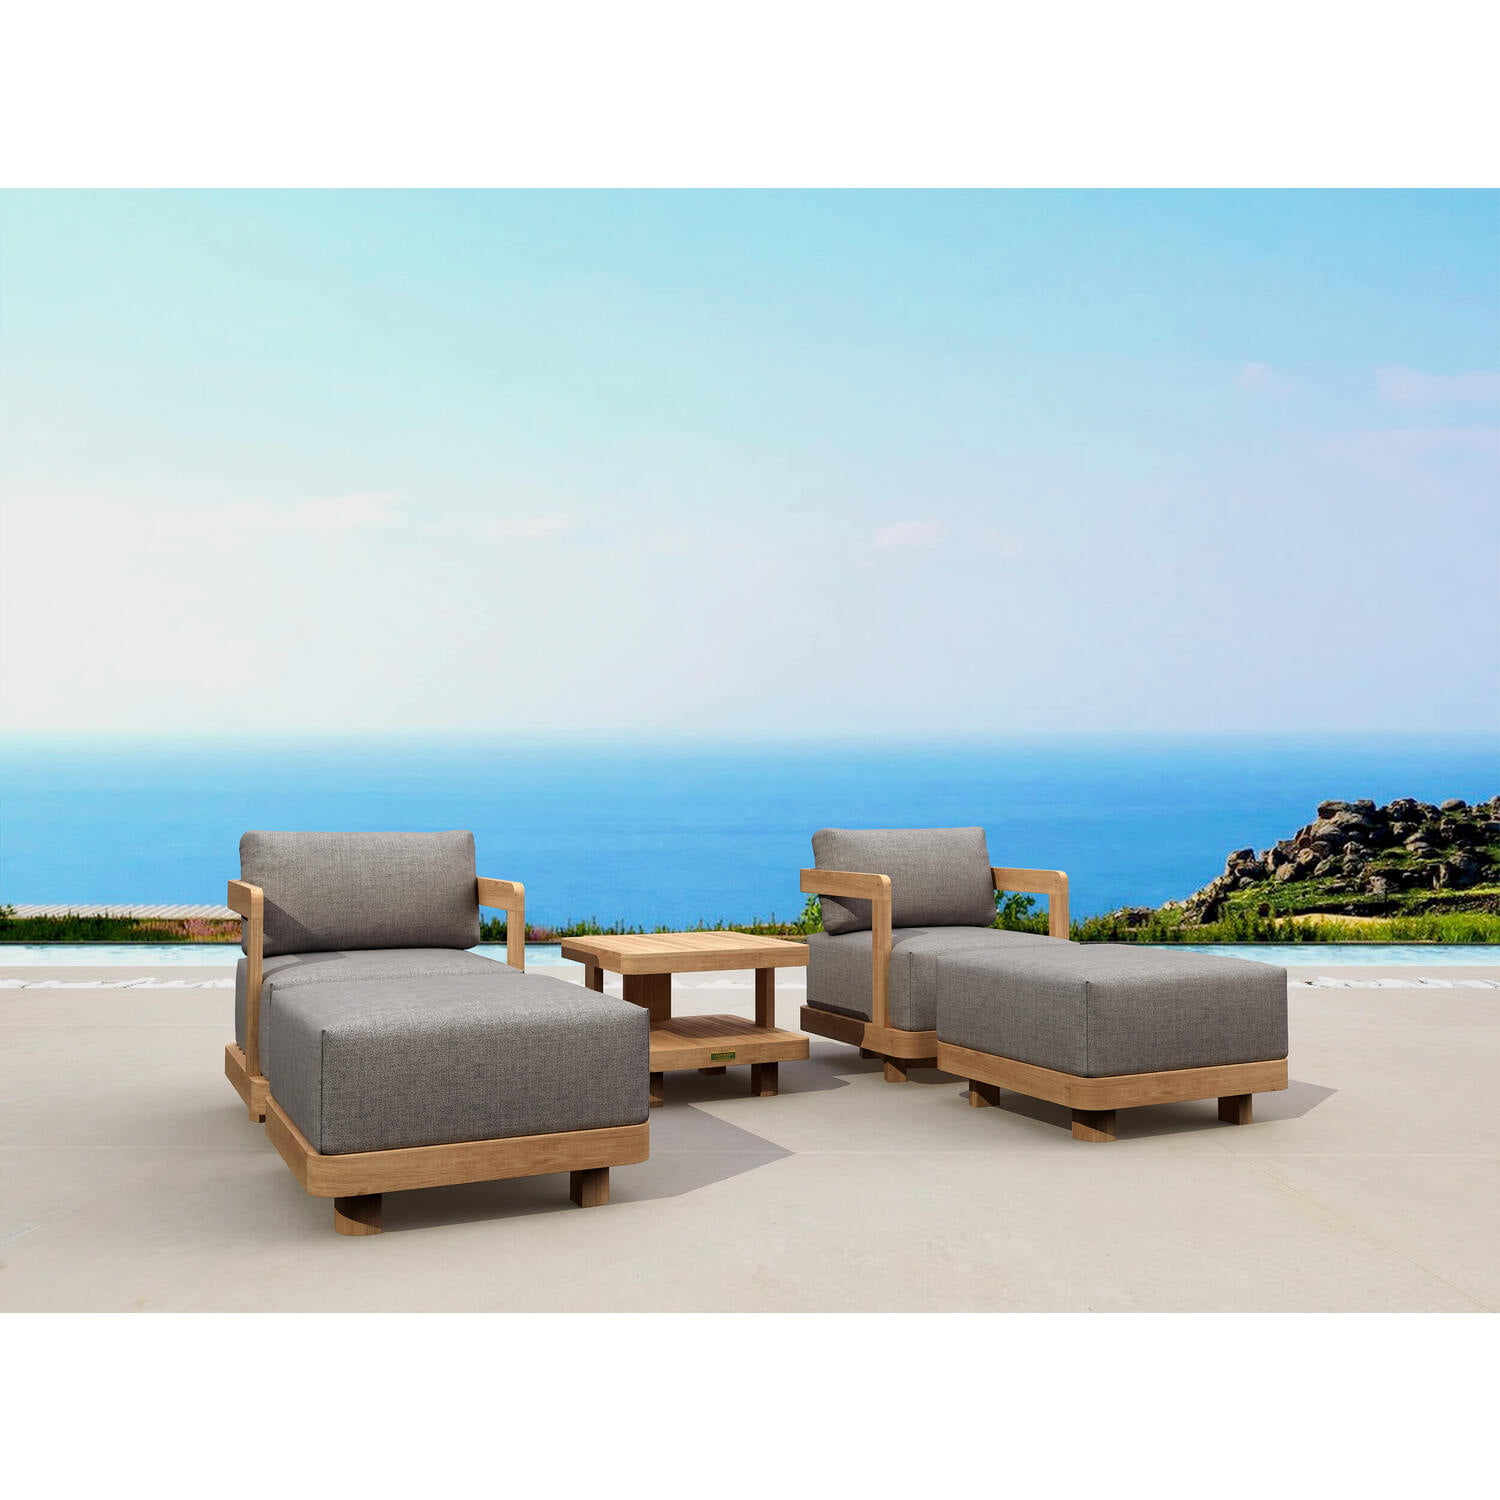 Picture of Anderson Teak SET-905 Granada Deep Seating Set, Natural Smooth Well Sanded - 5 Piece